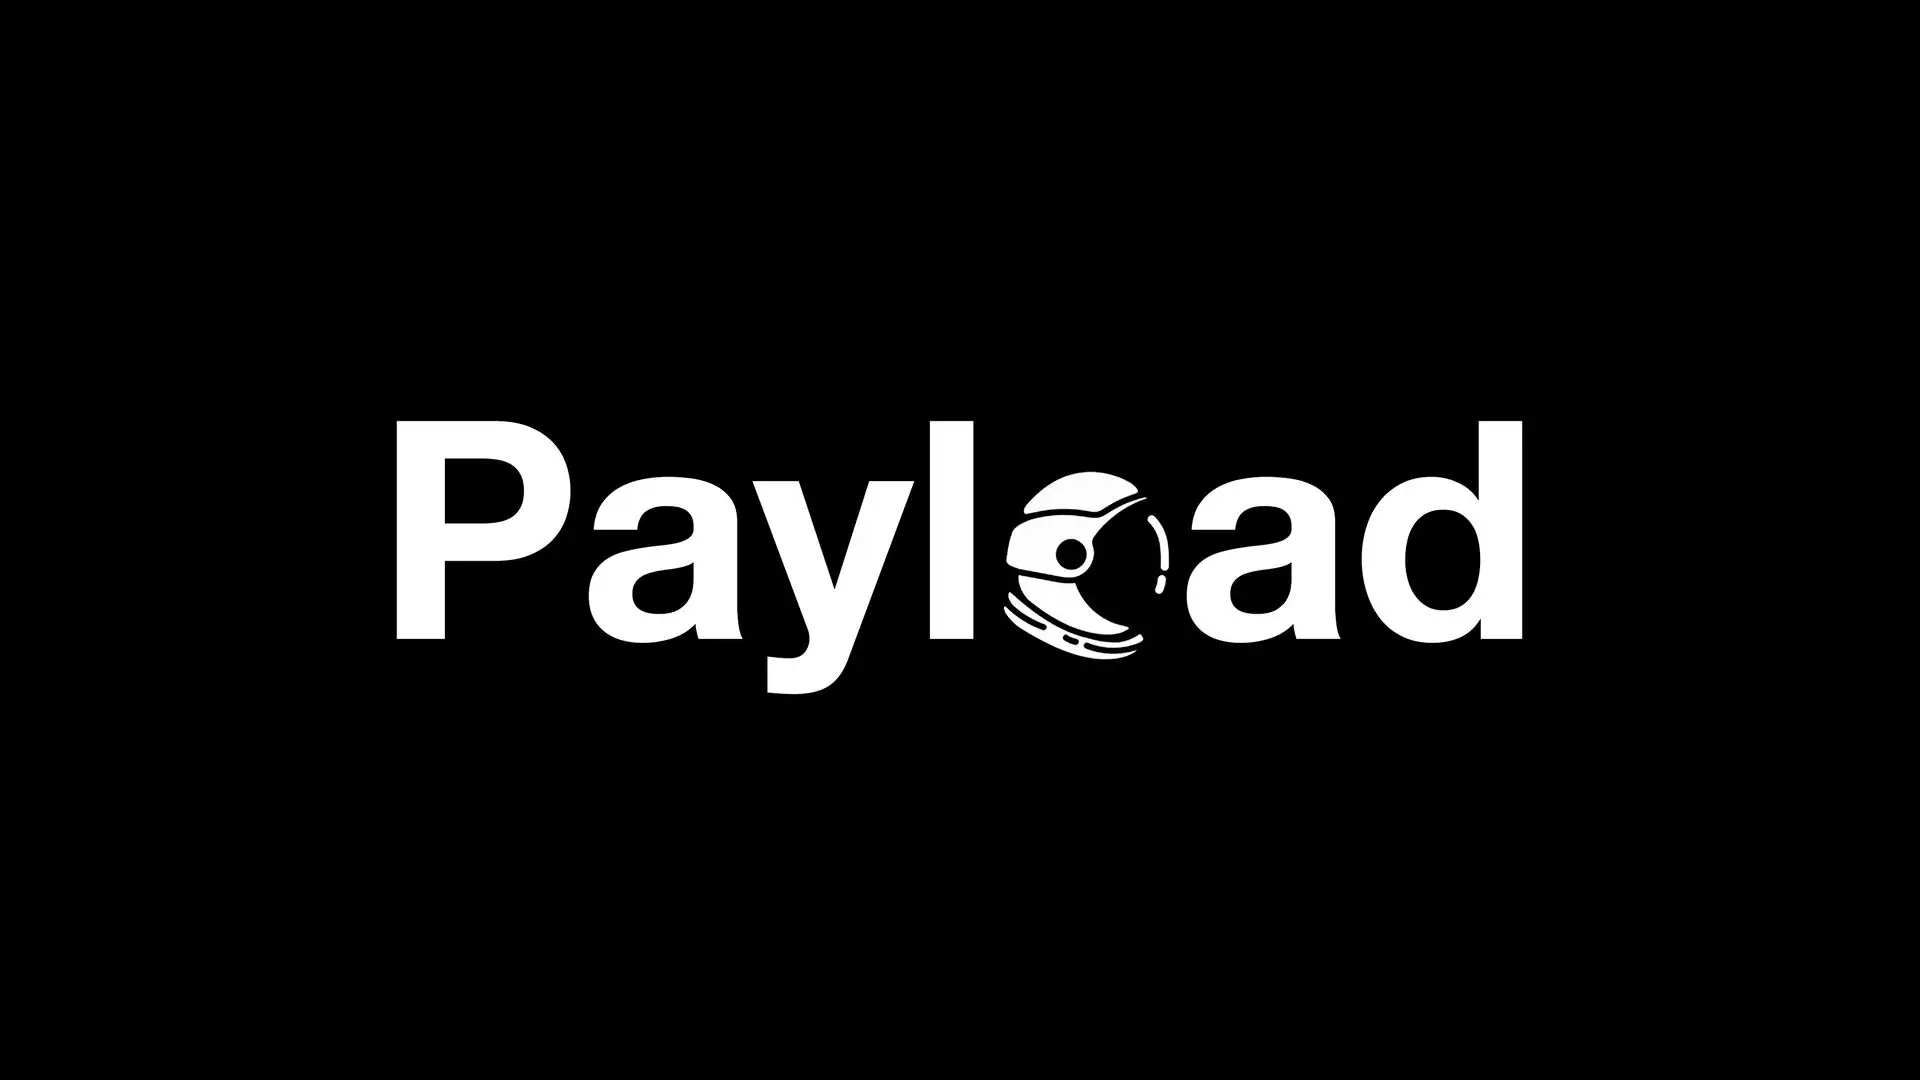 Payload: The newsletter covering the business of space